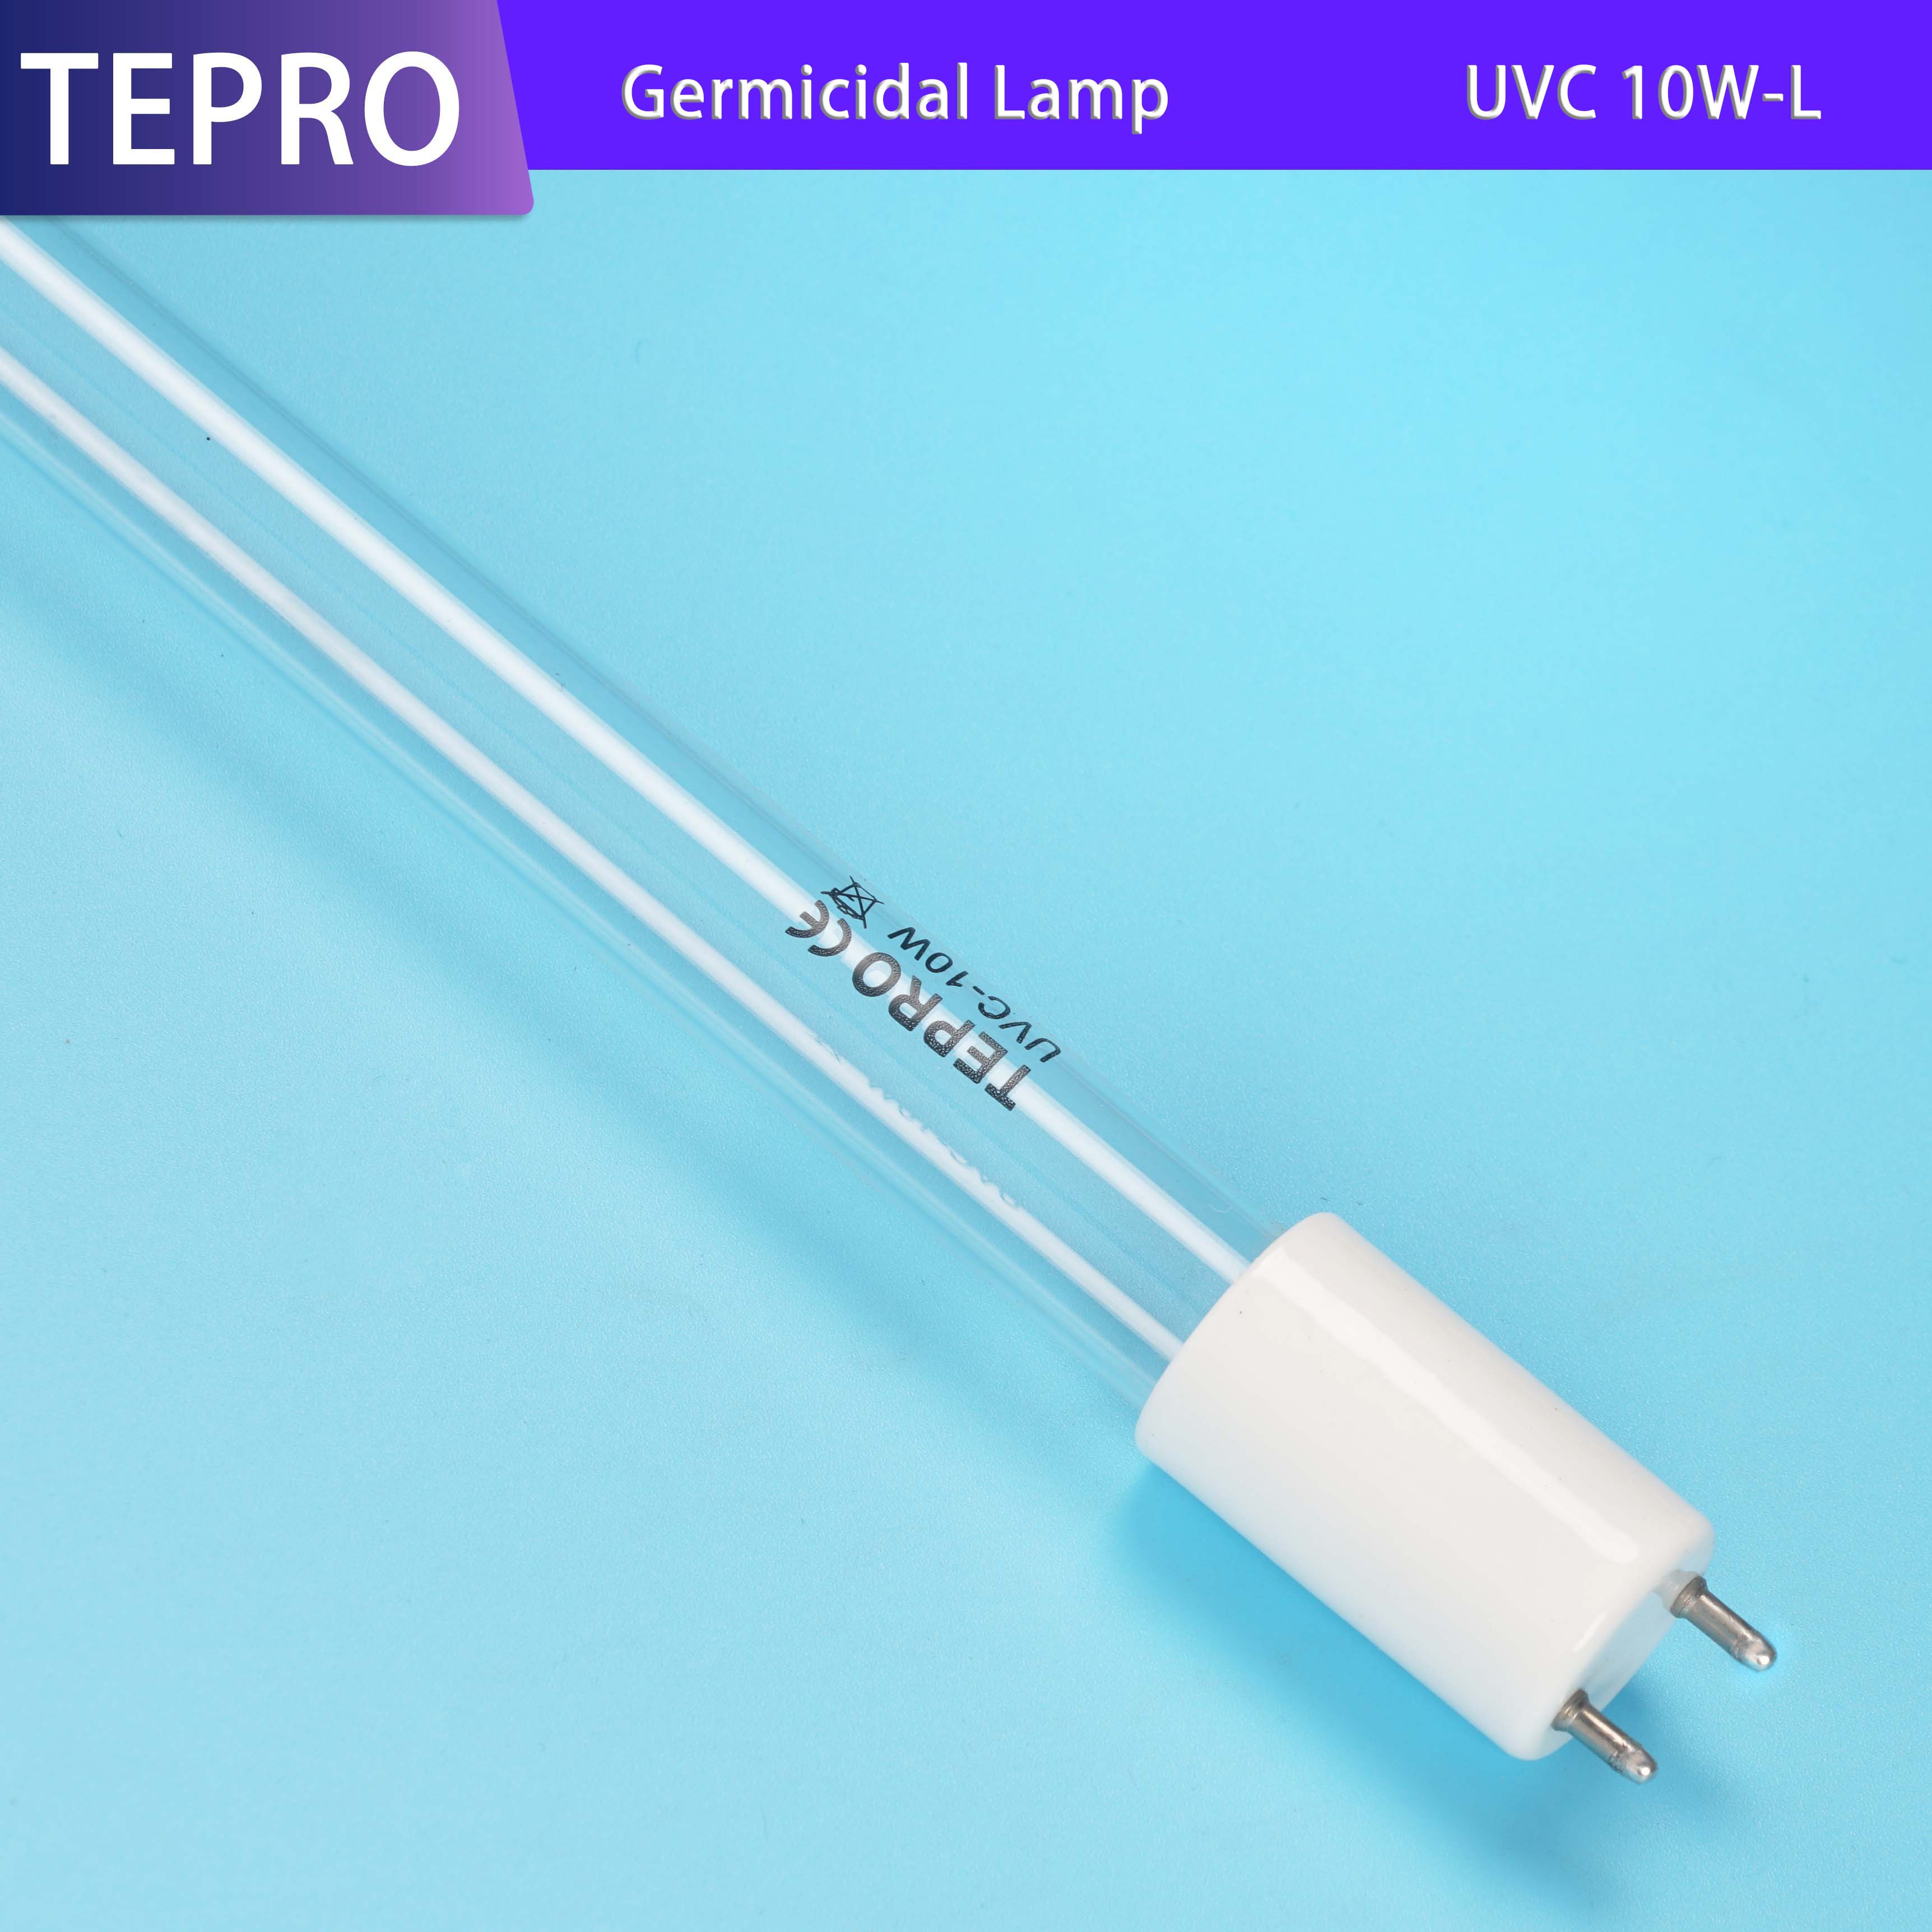 application-conventional uvb light supply for nails-Tepro-img-1